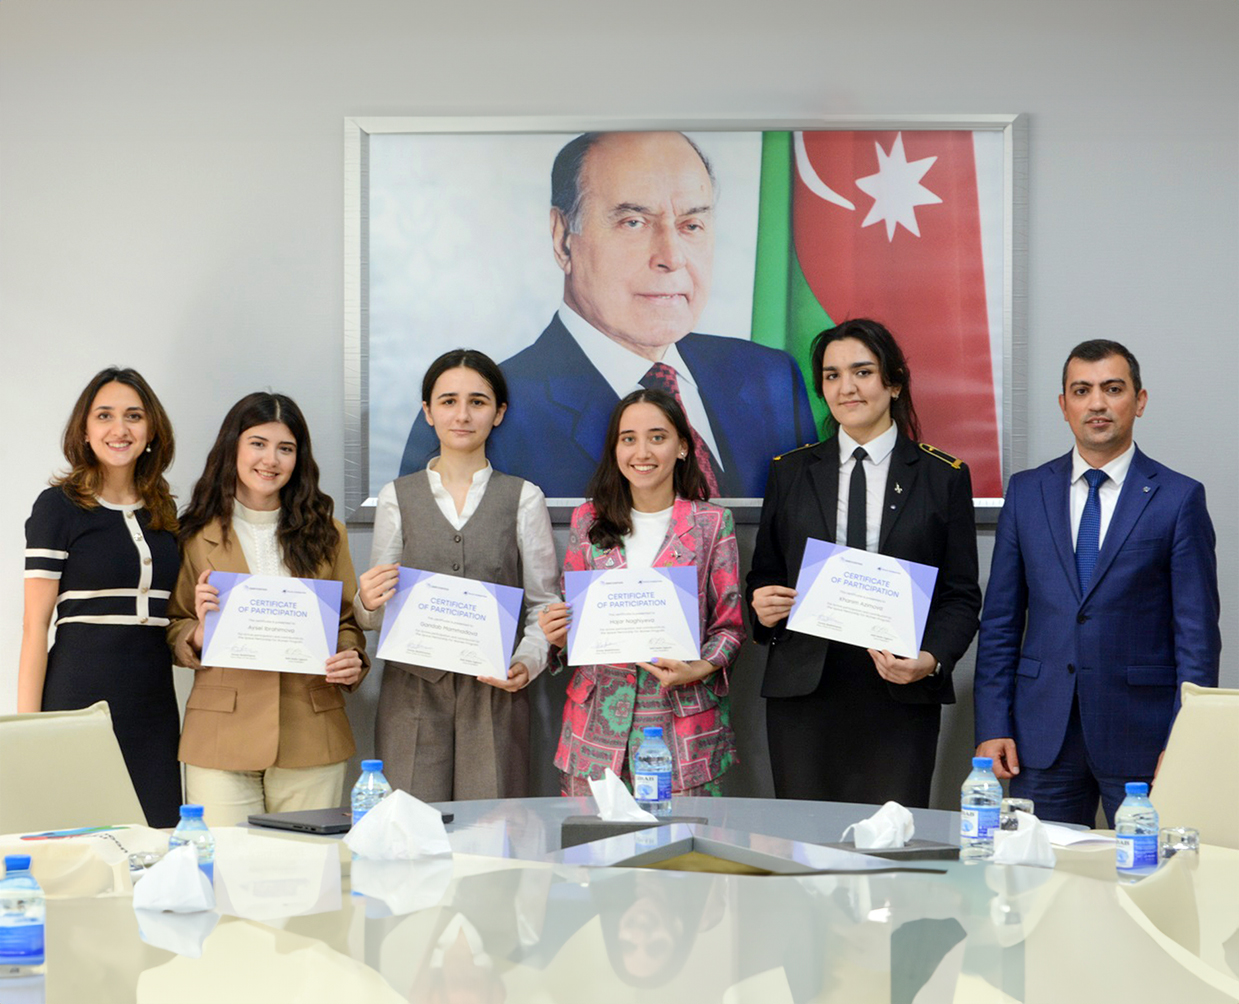 “Space Mentorship for Women” program has concluded